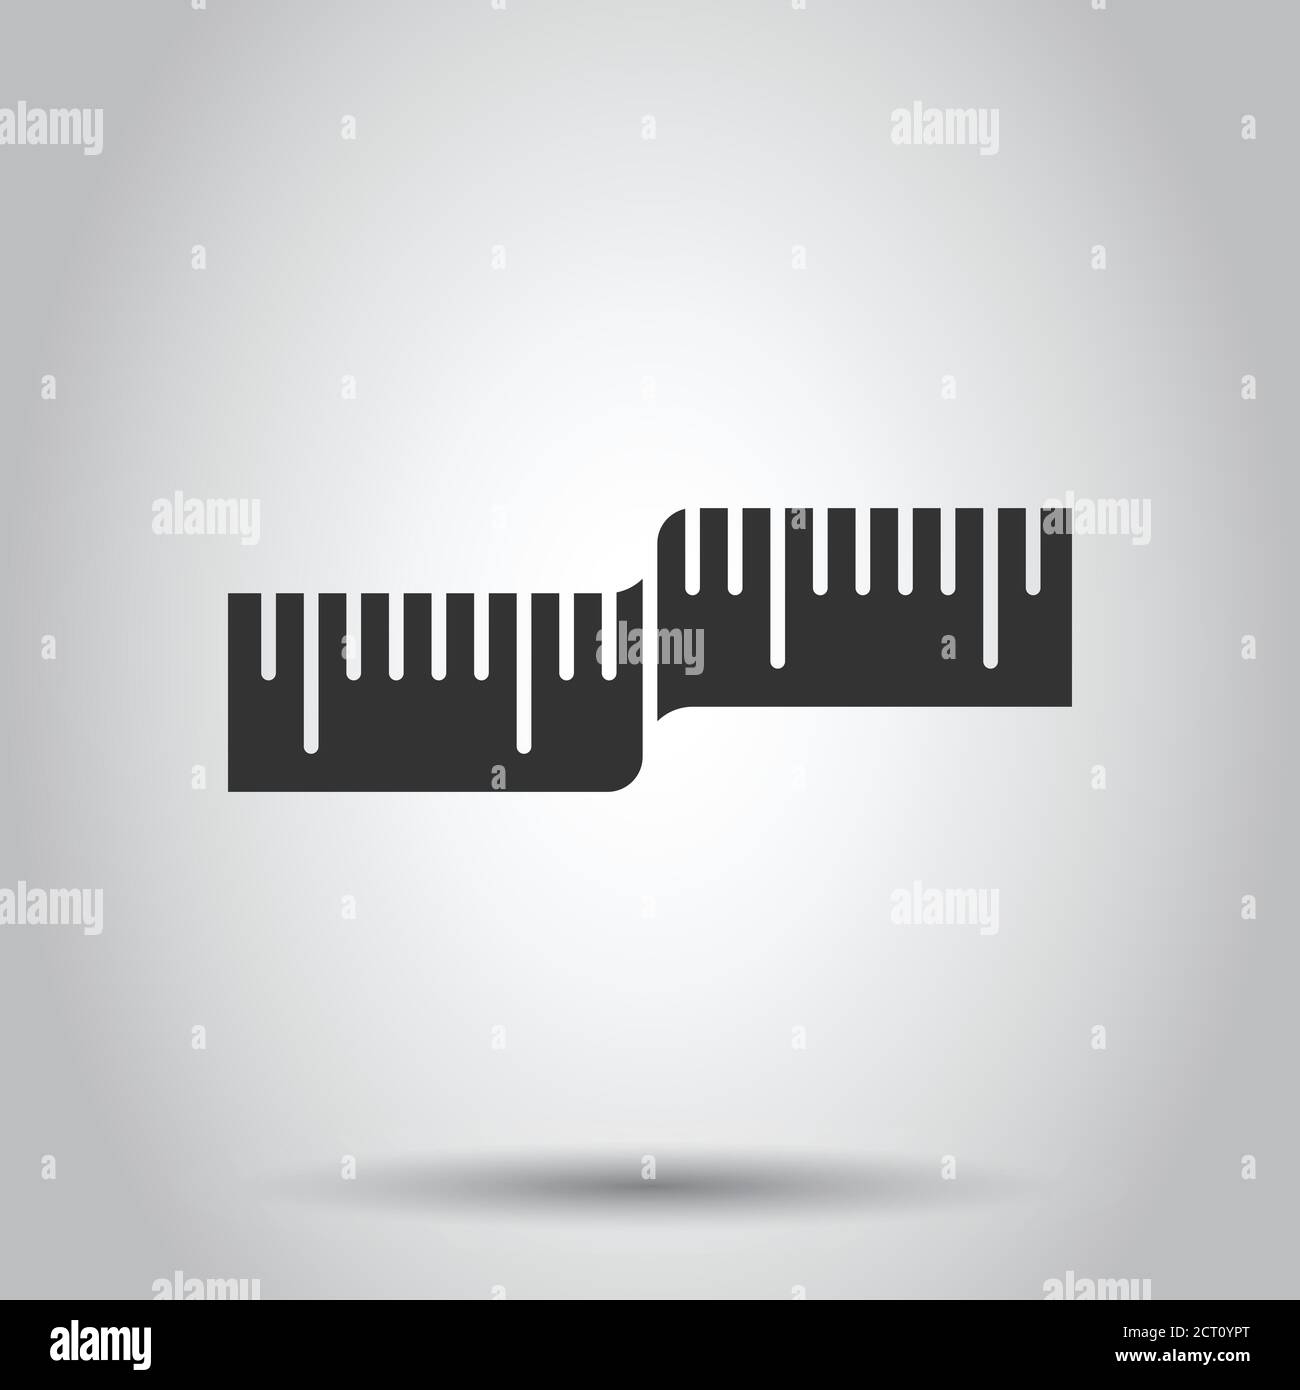 https://c8.alamy.com/comp/2CT0YPT/measure-tape-icon-in-flat-style-ruler-sign-vector-illustration-on-white-isolated-background-meter-business-concept-2CT0YPT.jpg